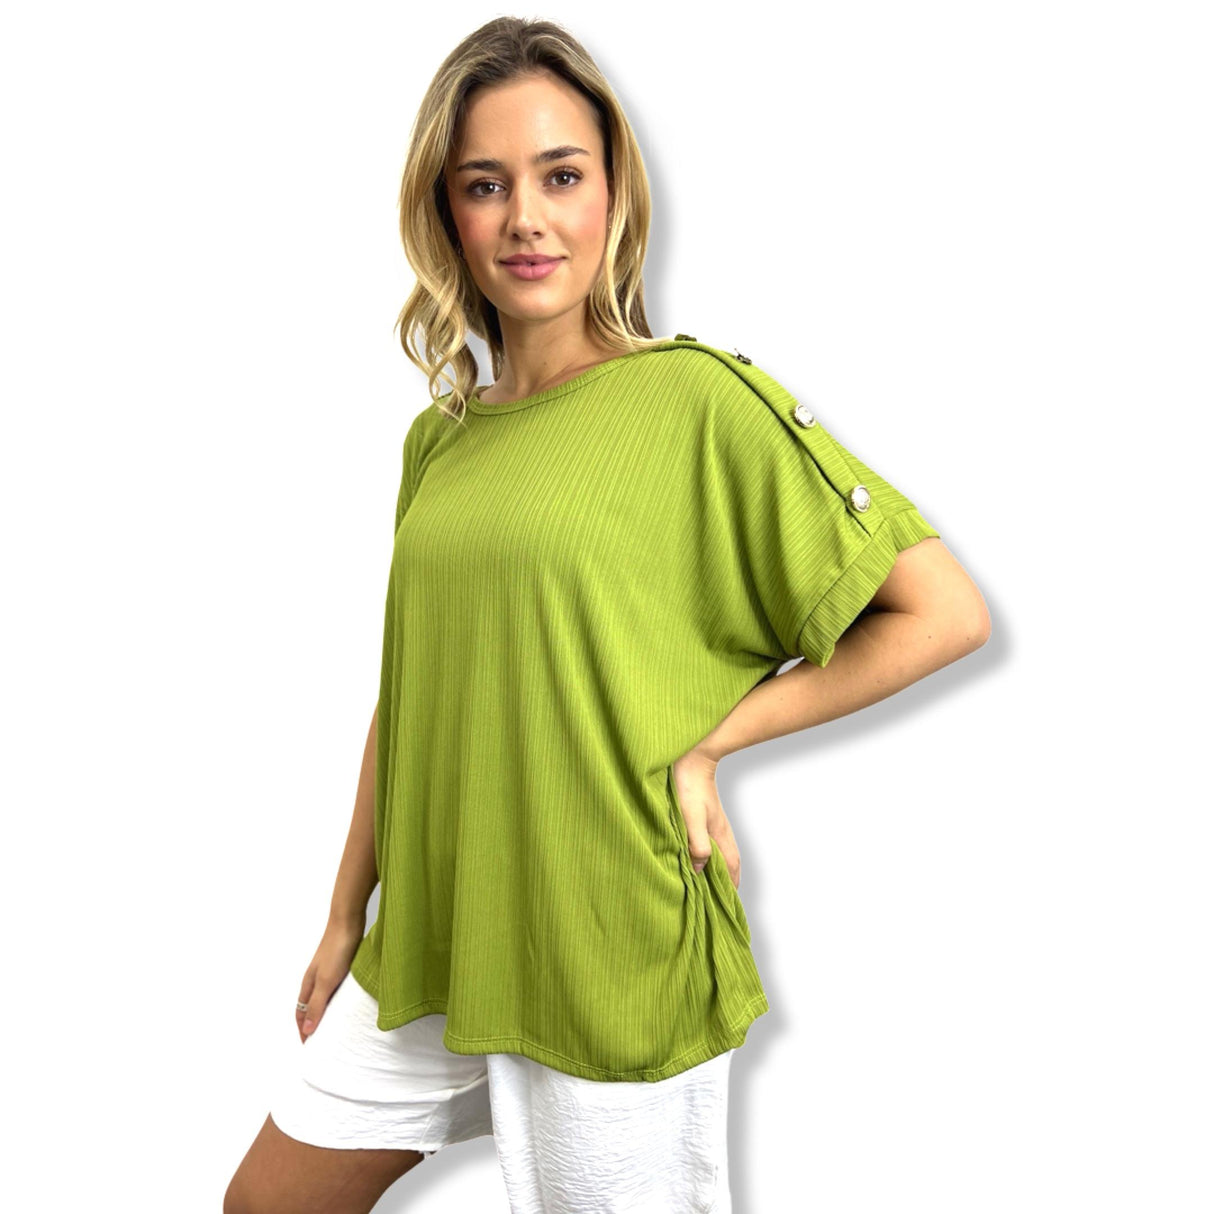 BUTTON TOP LADISE TOP SUPER STRETCHY ONE SIZE FITS ALL 12-24